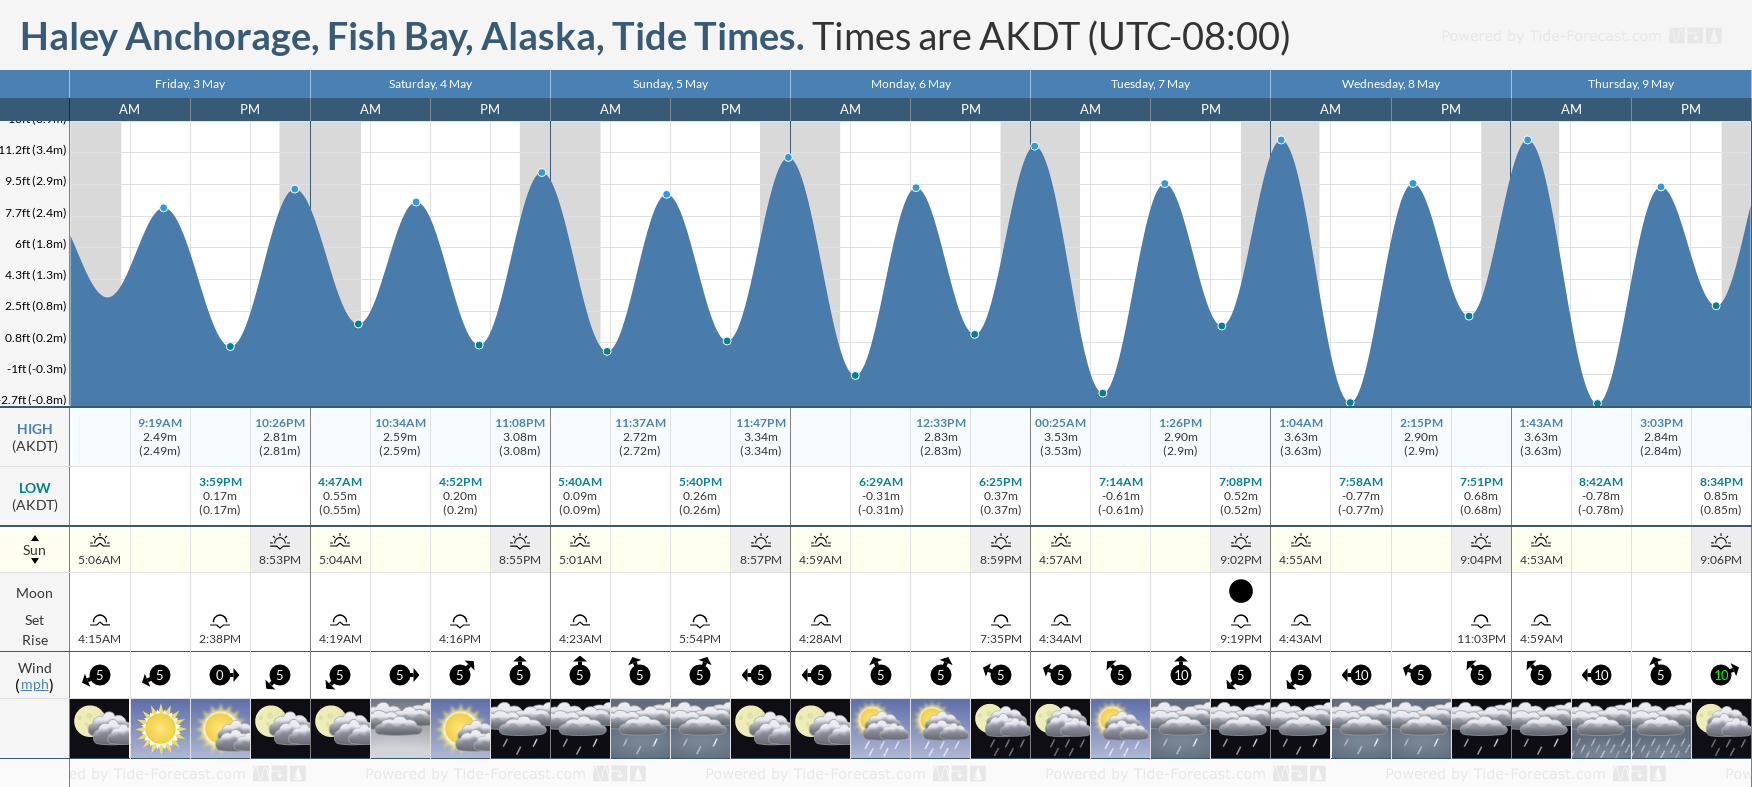 Haley Anchorage, Fish Bay, Alaska Tide Chart including high and low tide tide times for the next 7 days